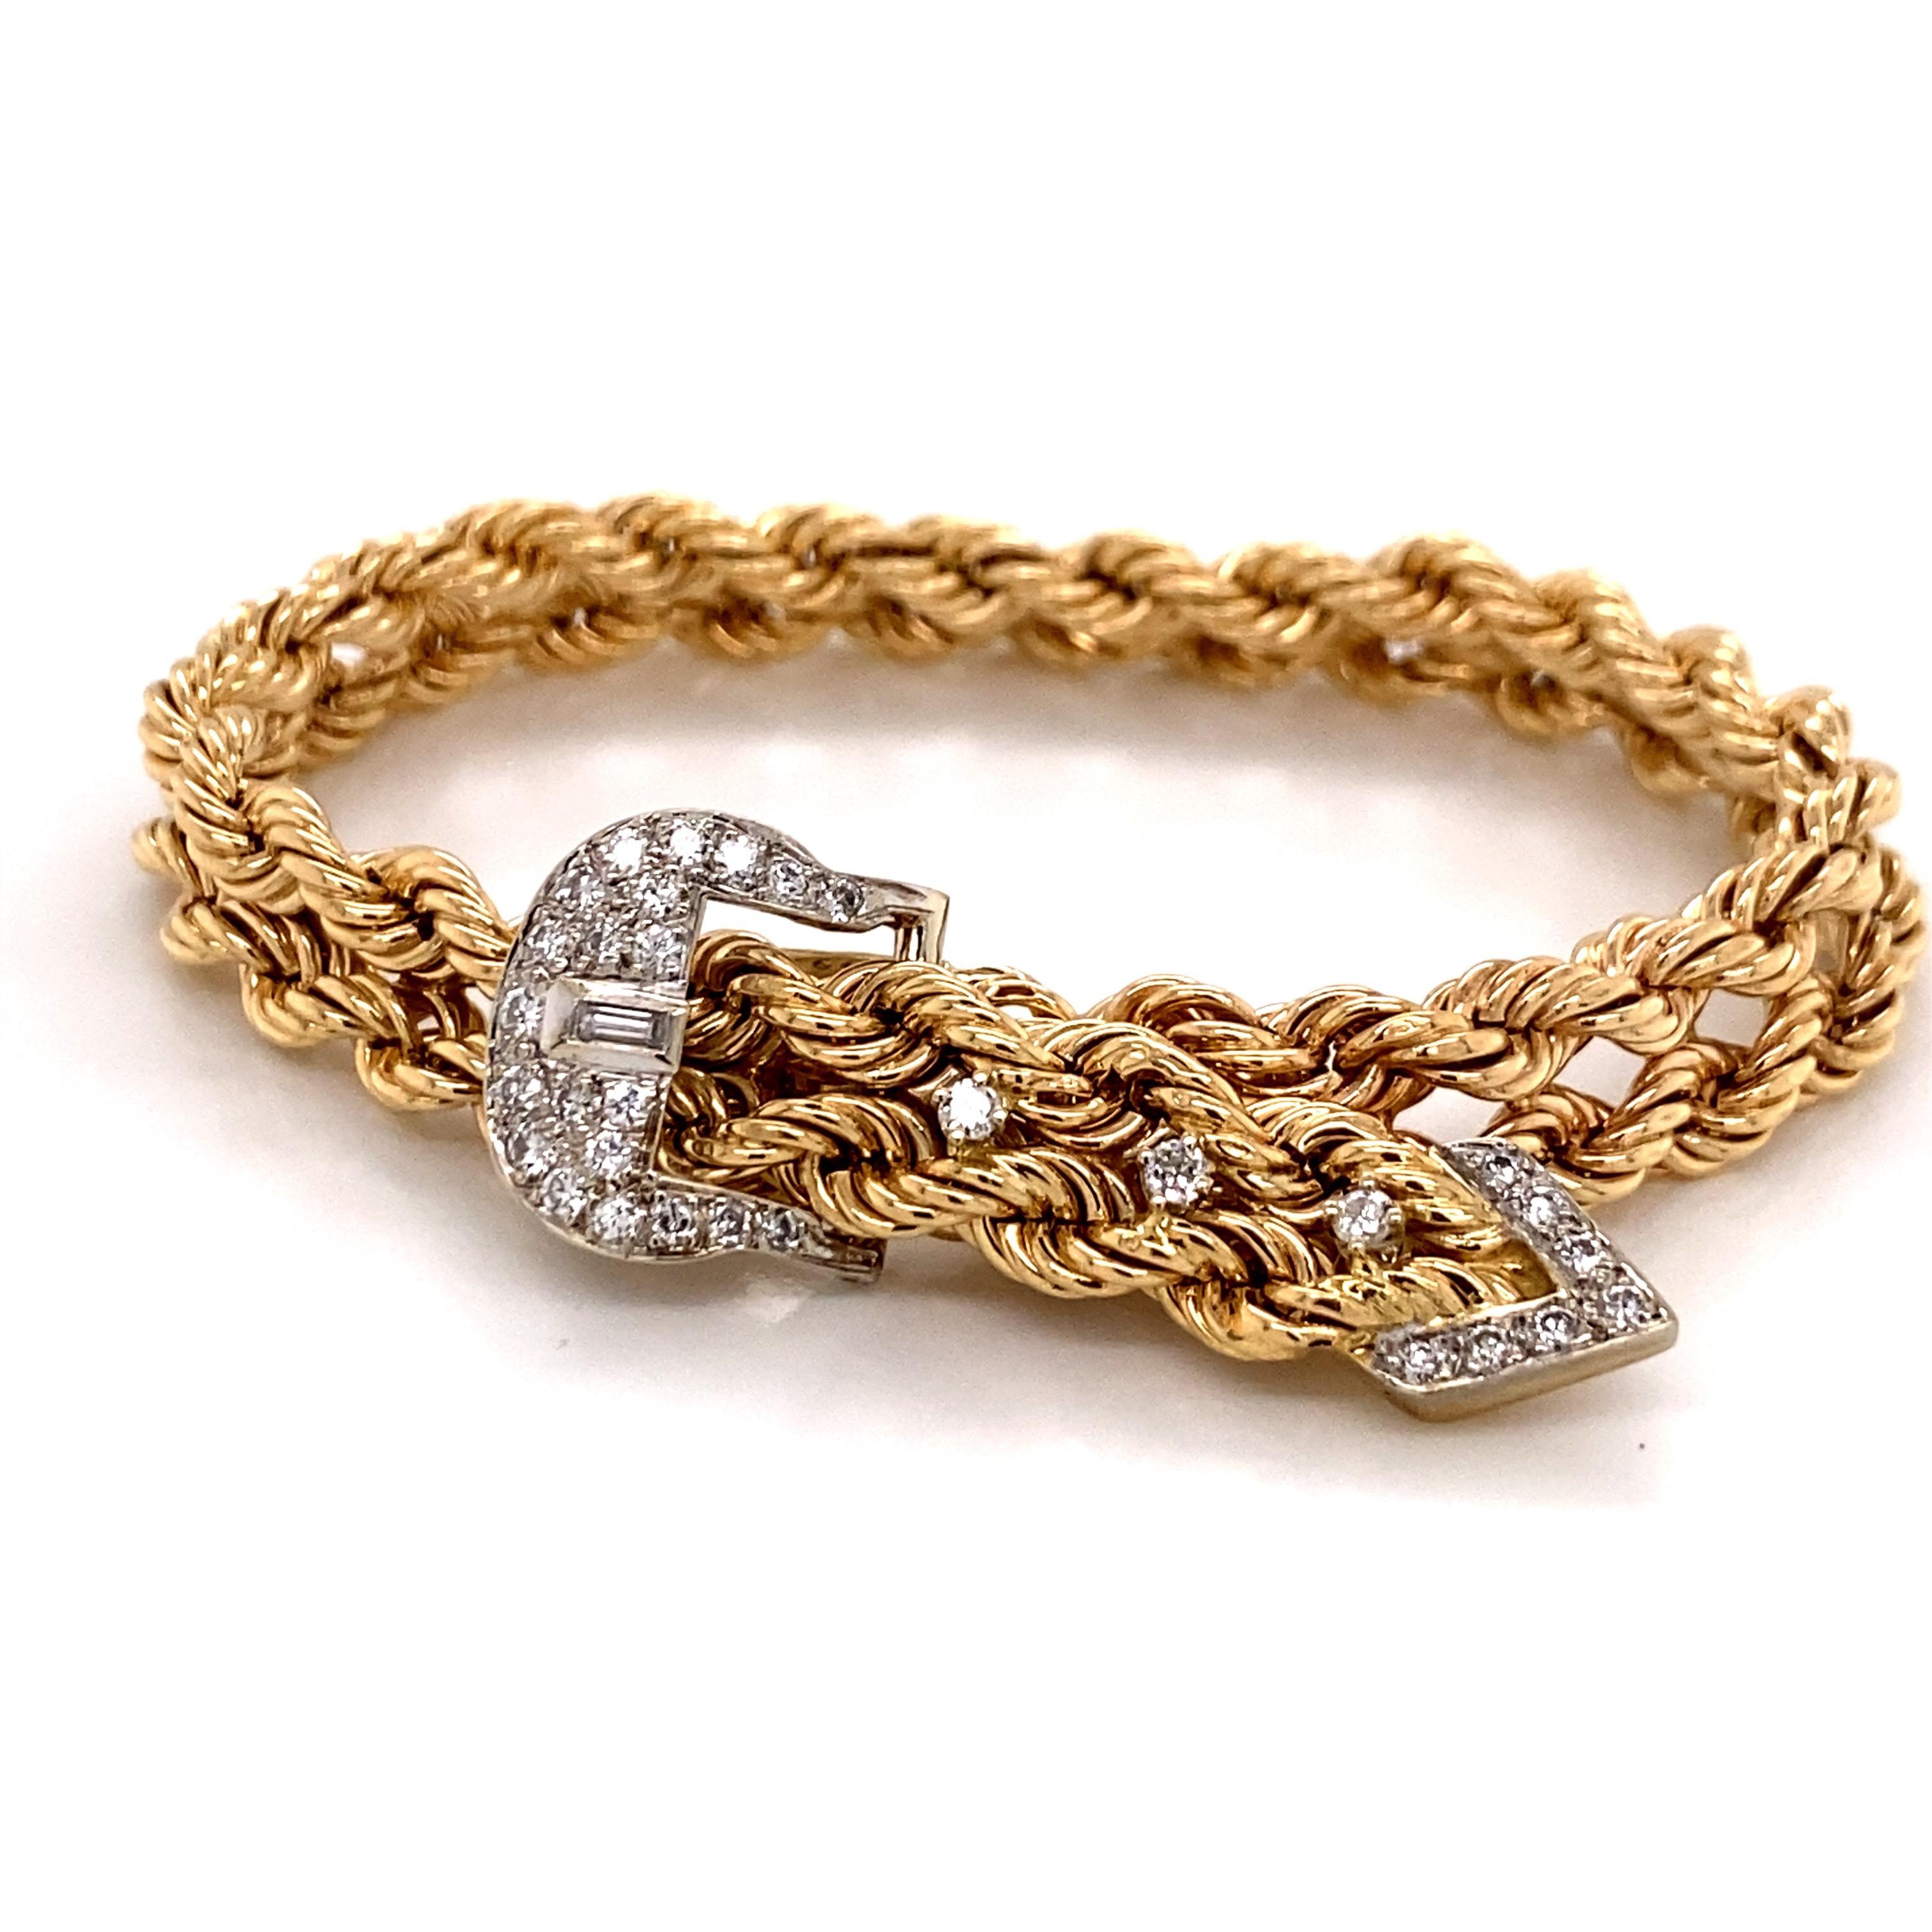 Vintage 1970's 14KY Gold Rope Bracelet with Adjustable Diamond Buckle Clasp - The double 1/4 inch wide rope bracelet can be worn at it's longest length of 7 1/4 inches. The diamond clasp and the end of bracelet has .57cts of round diamonds and one